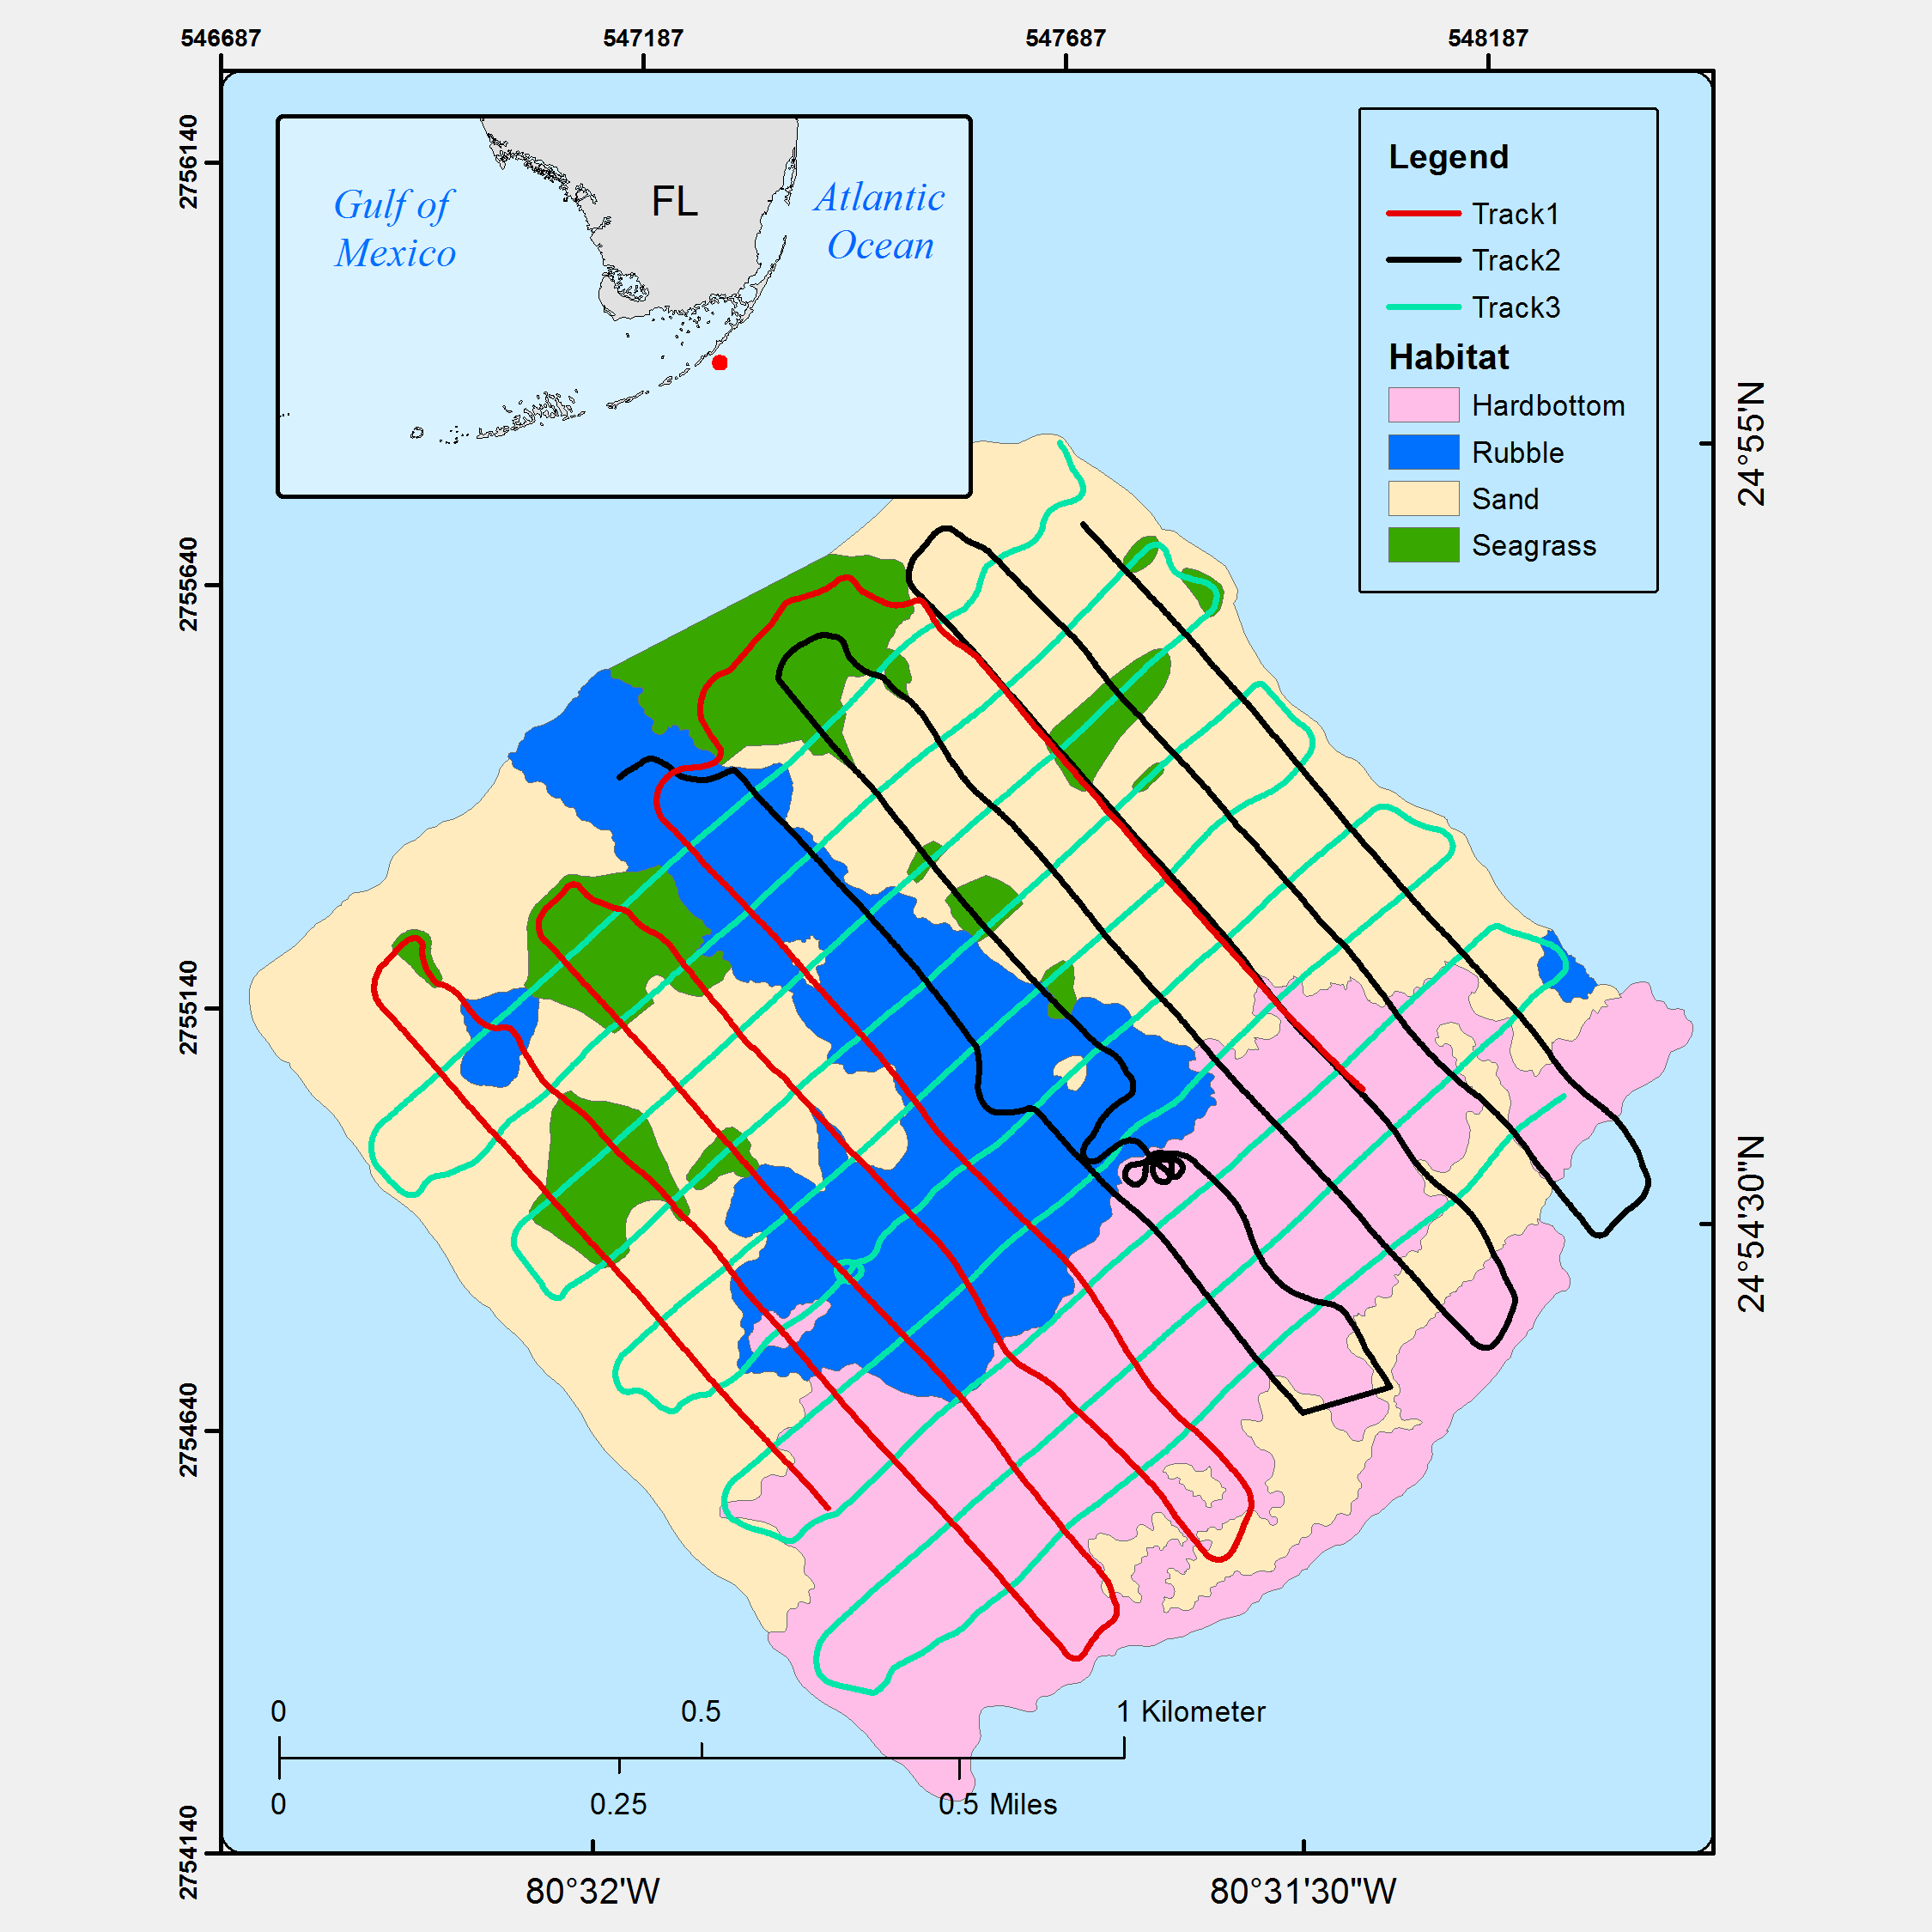 Graphic map showing the plot of the polygons contained in this data release, which represent the distribution of habitats found at Crocker Reef.